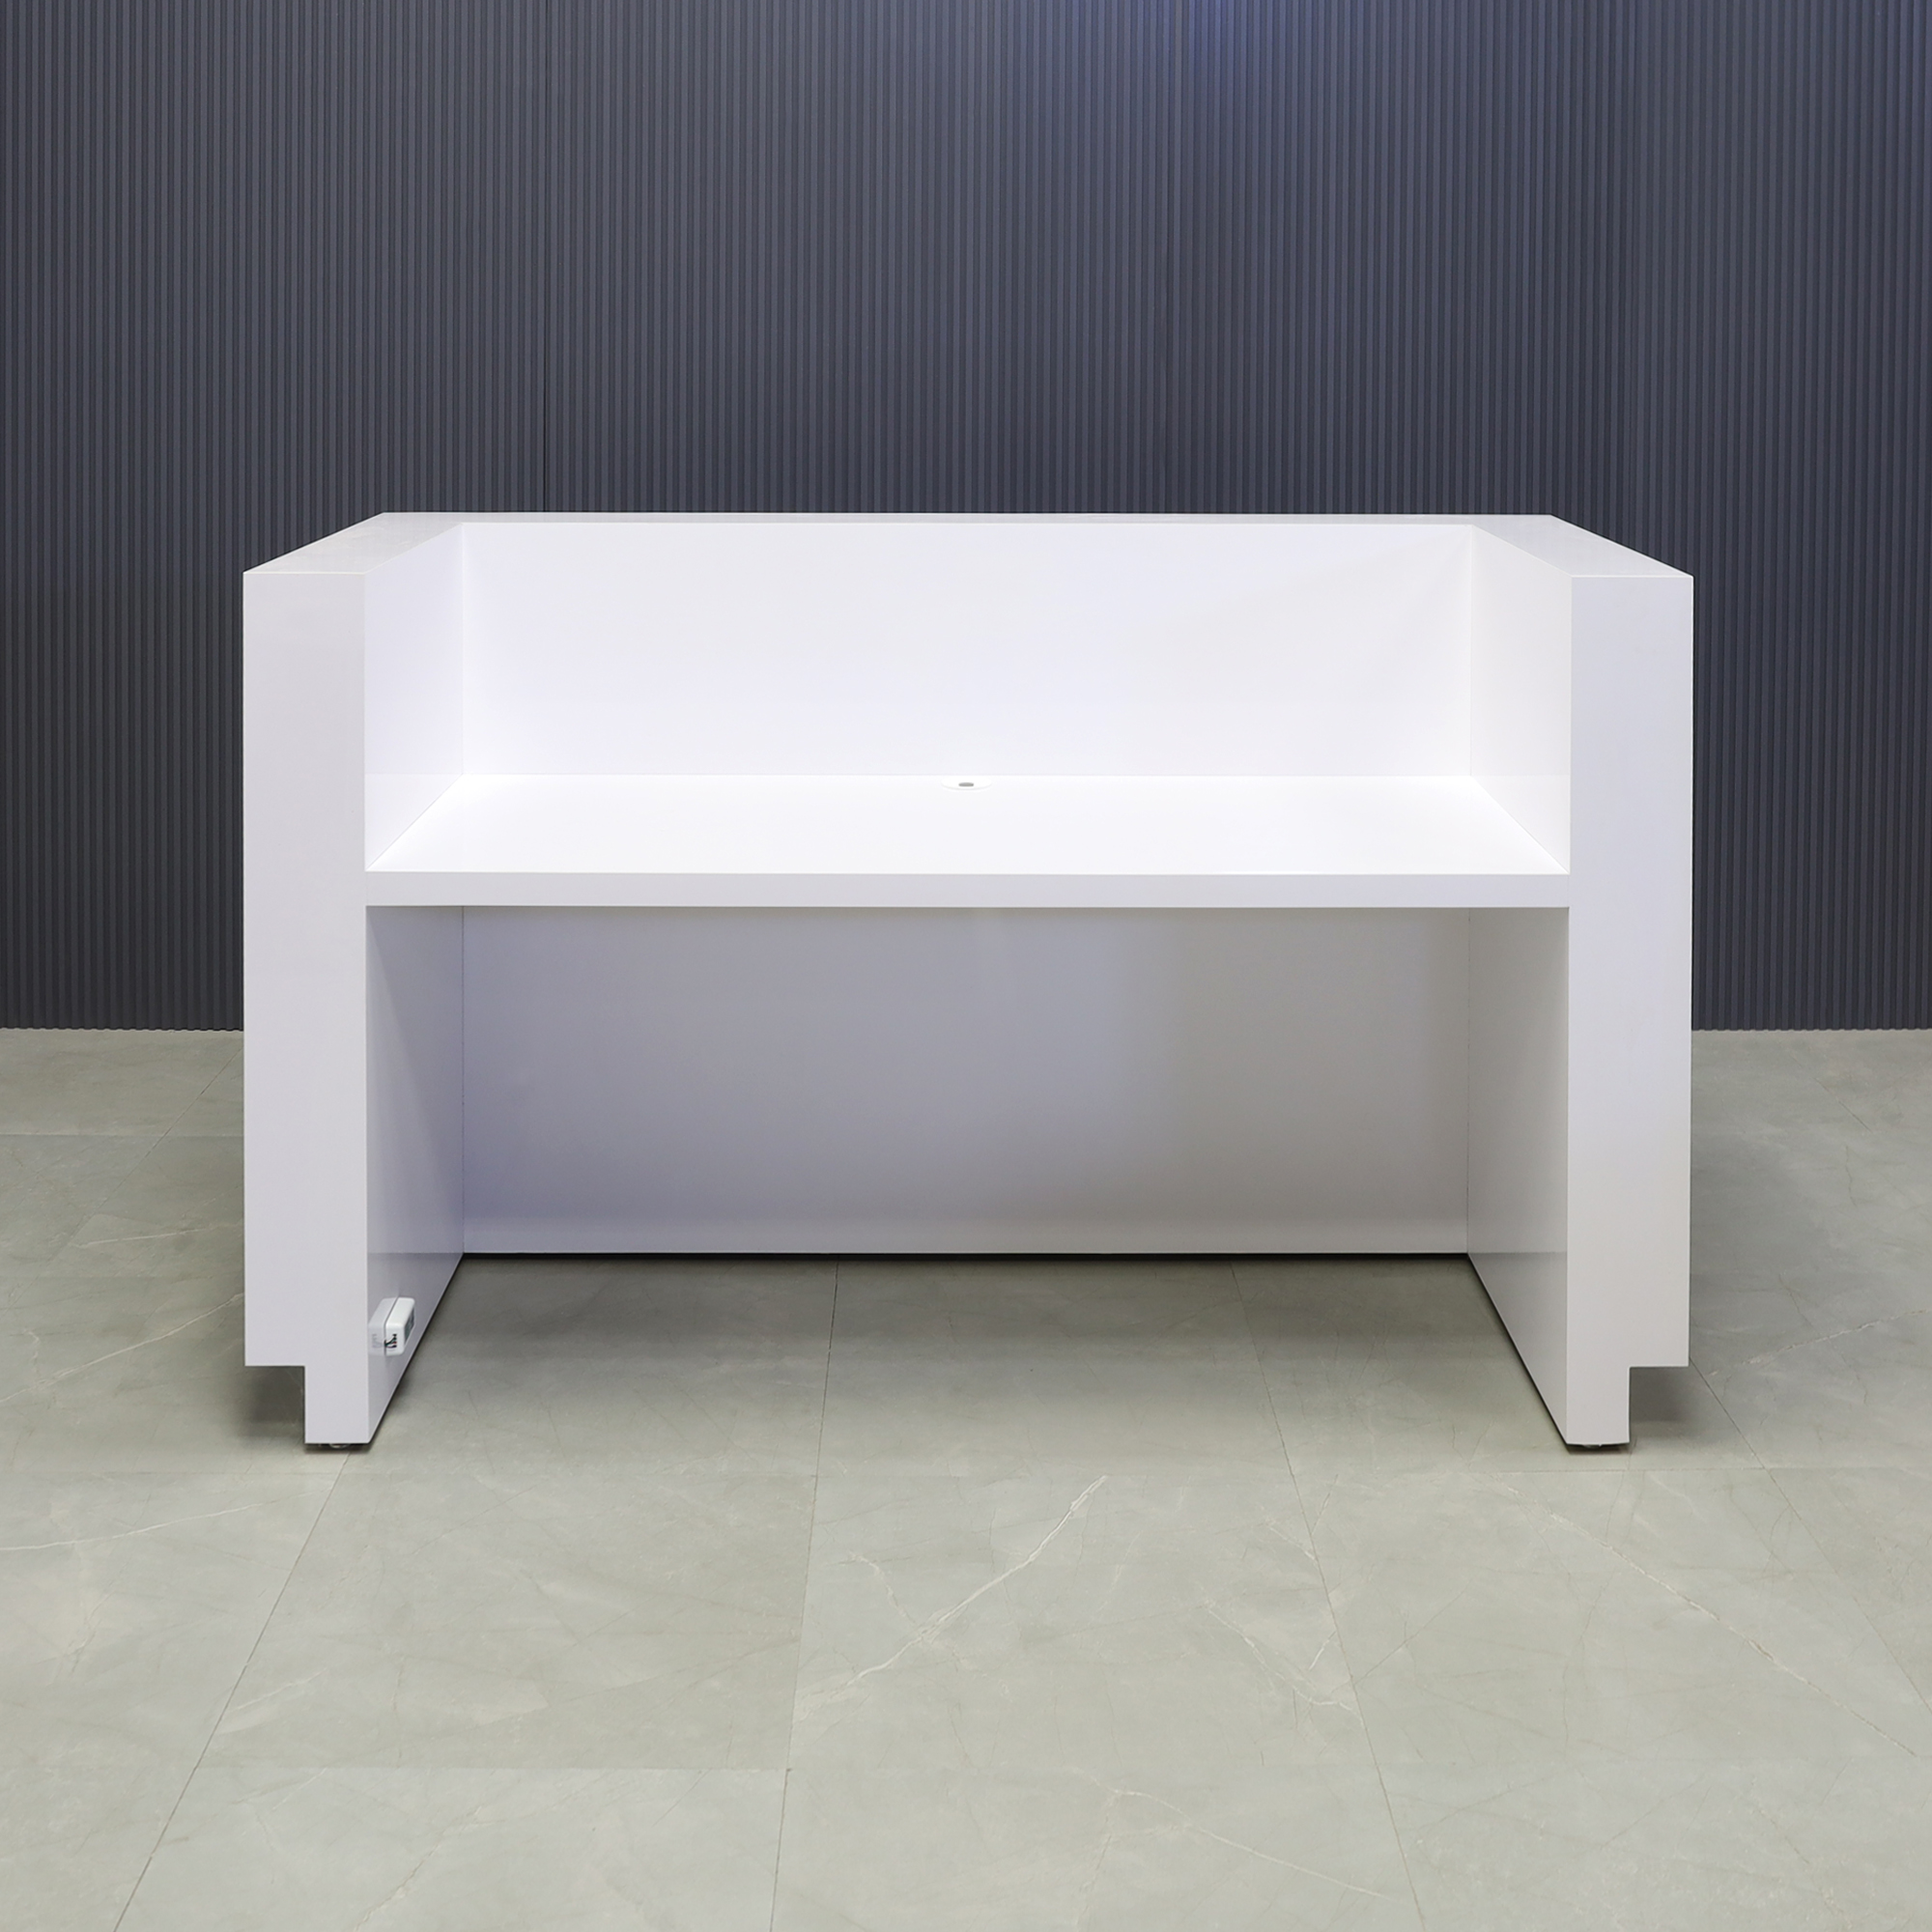 72-inch Dallas U-Shape Reception Desk in white gloss laminate main desk and brushed aluminum toe-kick, with color LED, shown here.